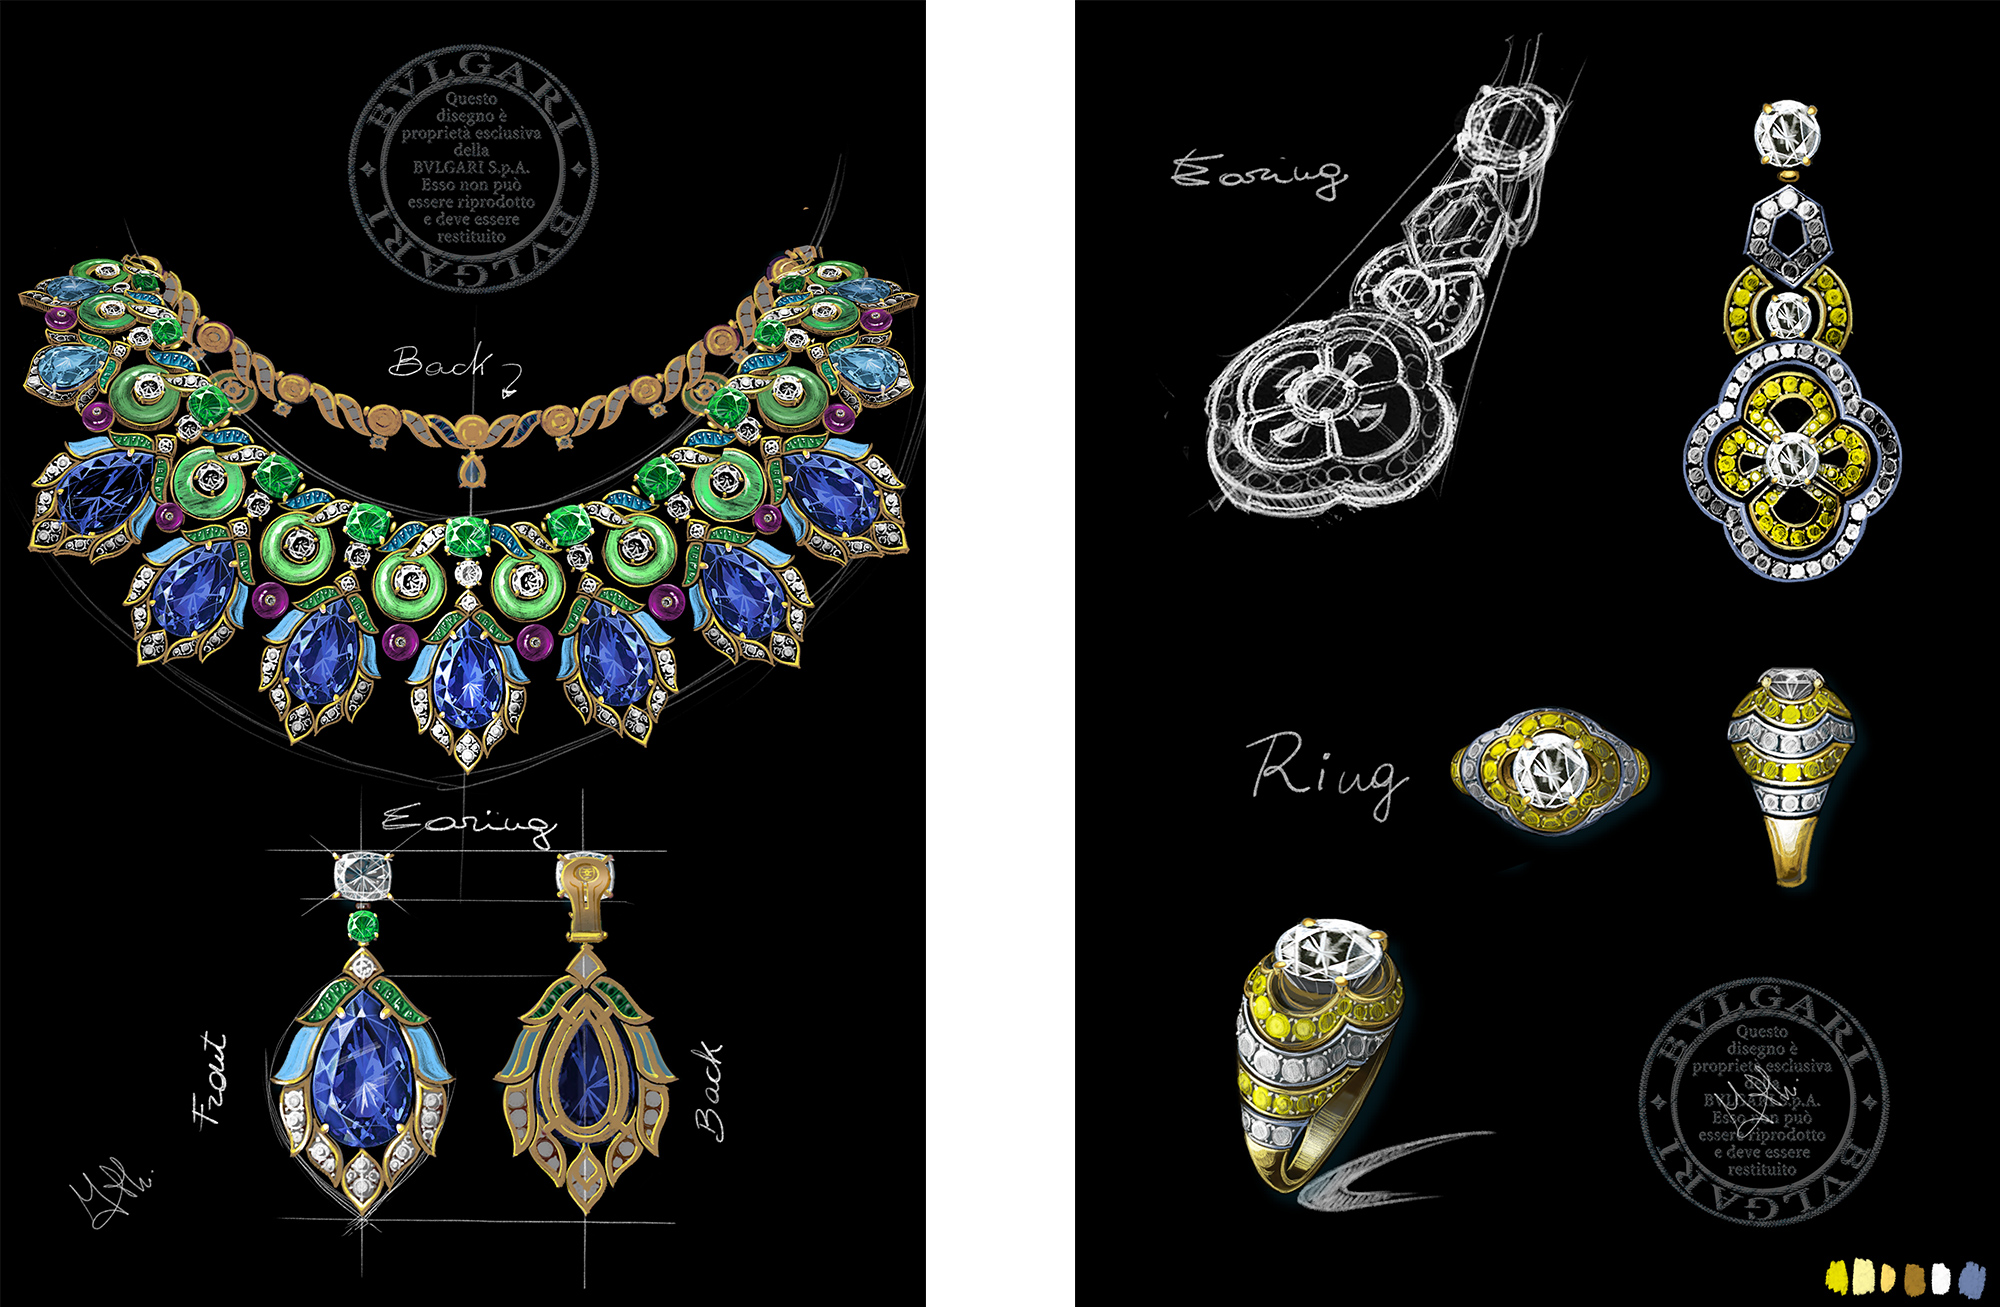 Technology and Tradition Coalesce for the Presentation of the High  Jewellery Collections